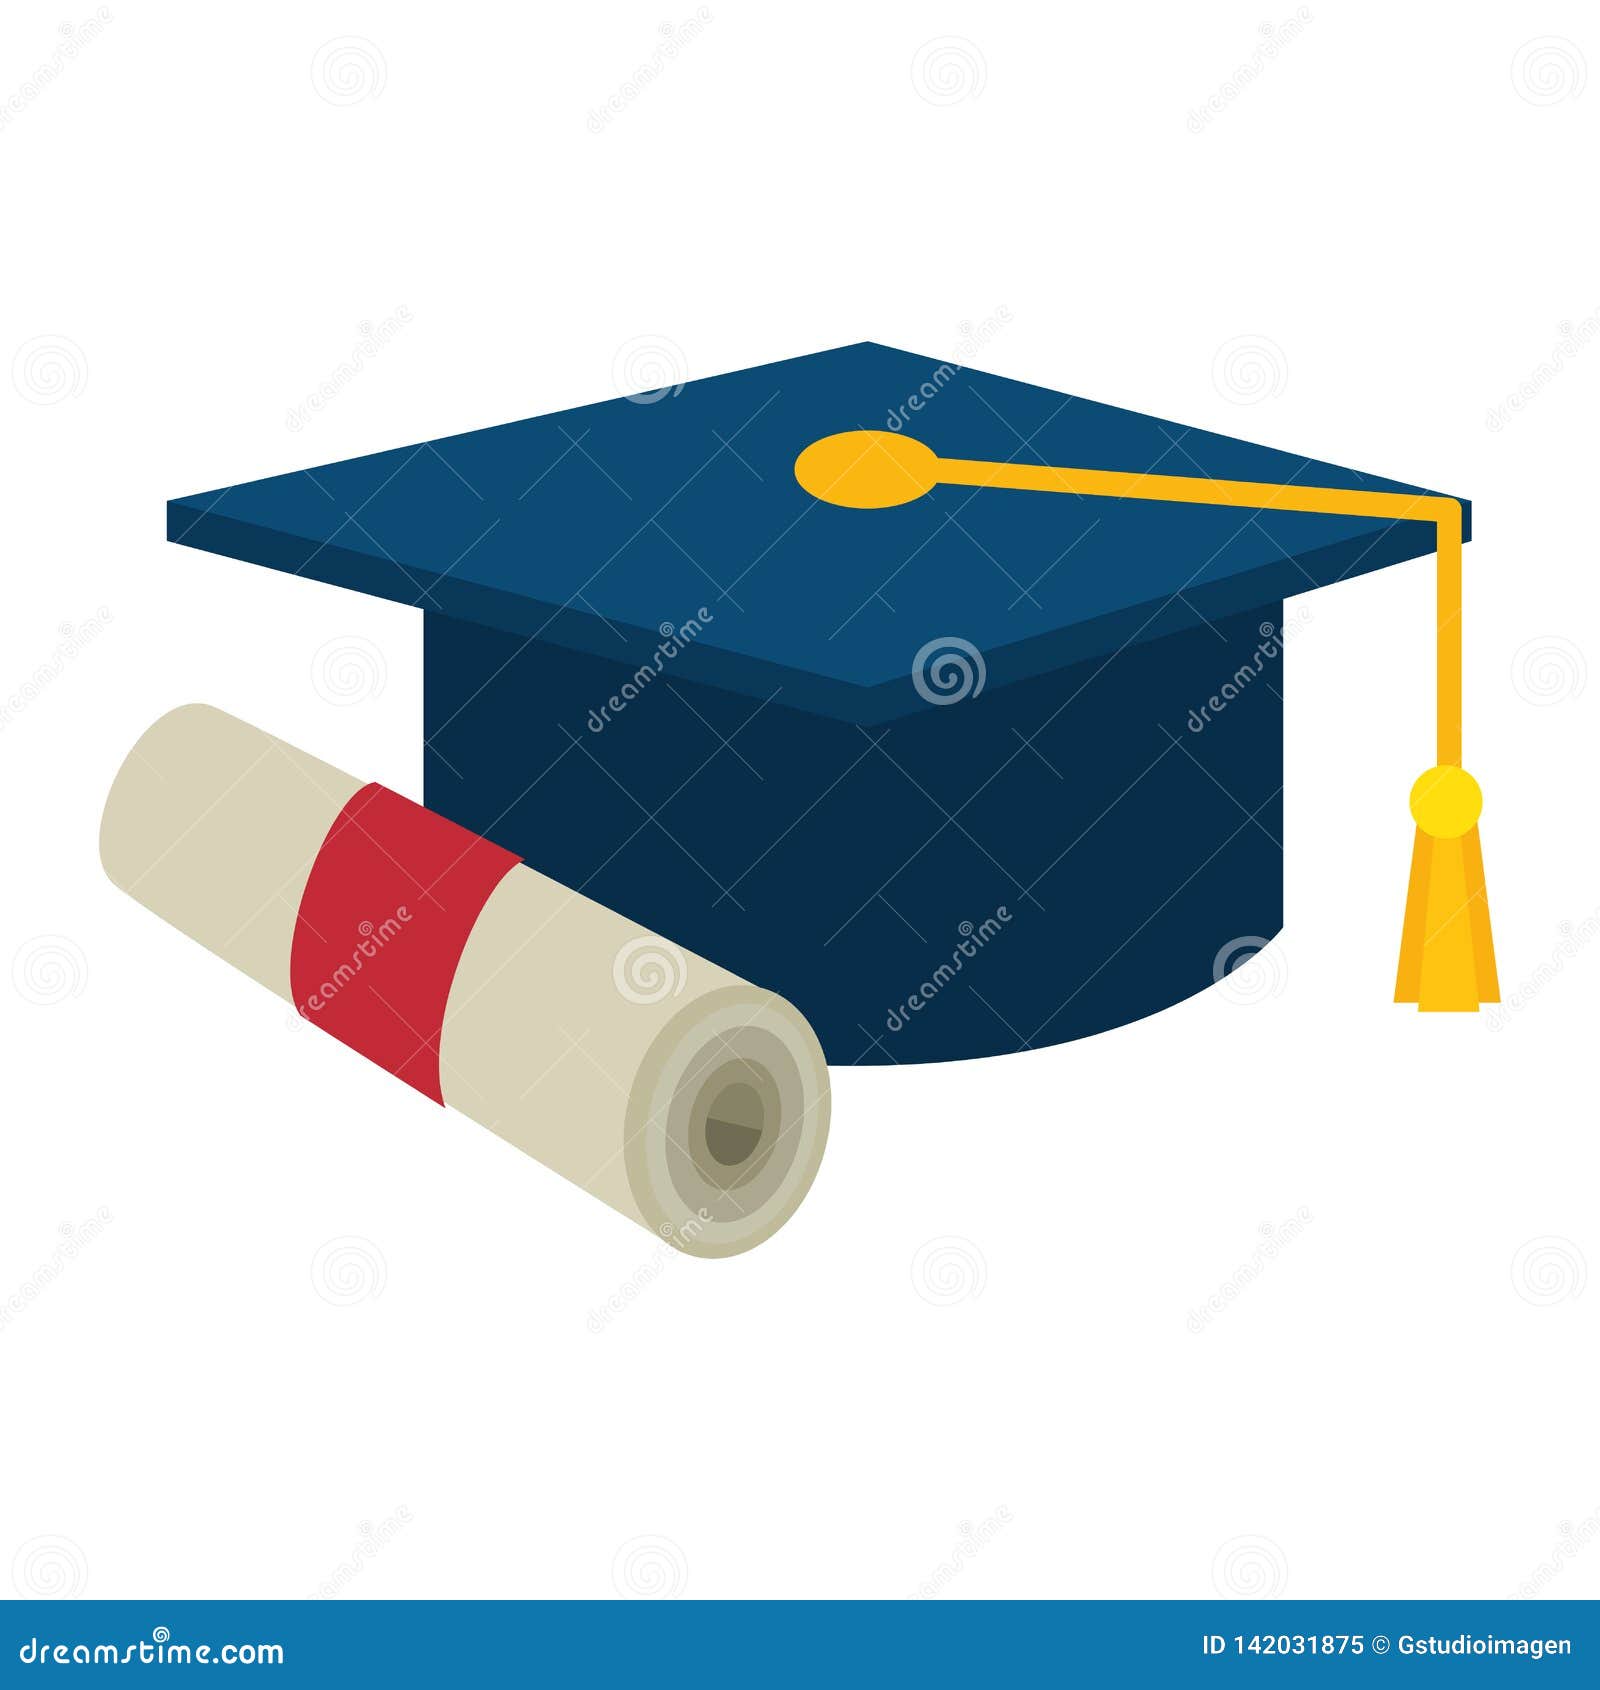 Graduation Hat with Diploma Stock Vector - Illustration of isolated ...